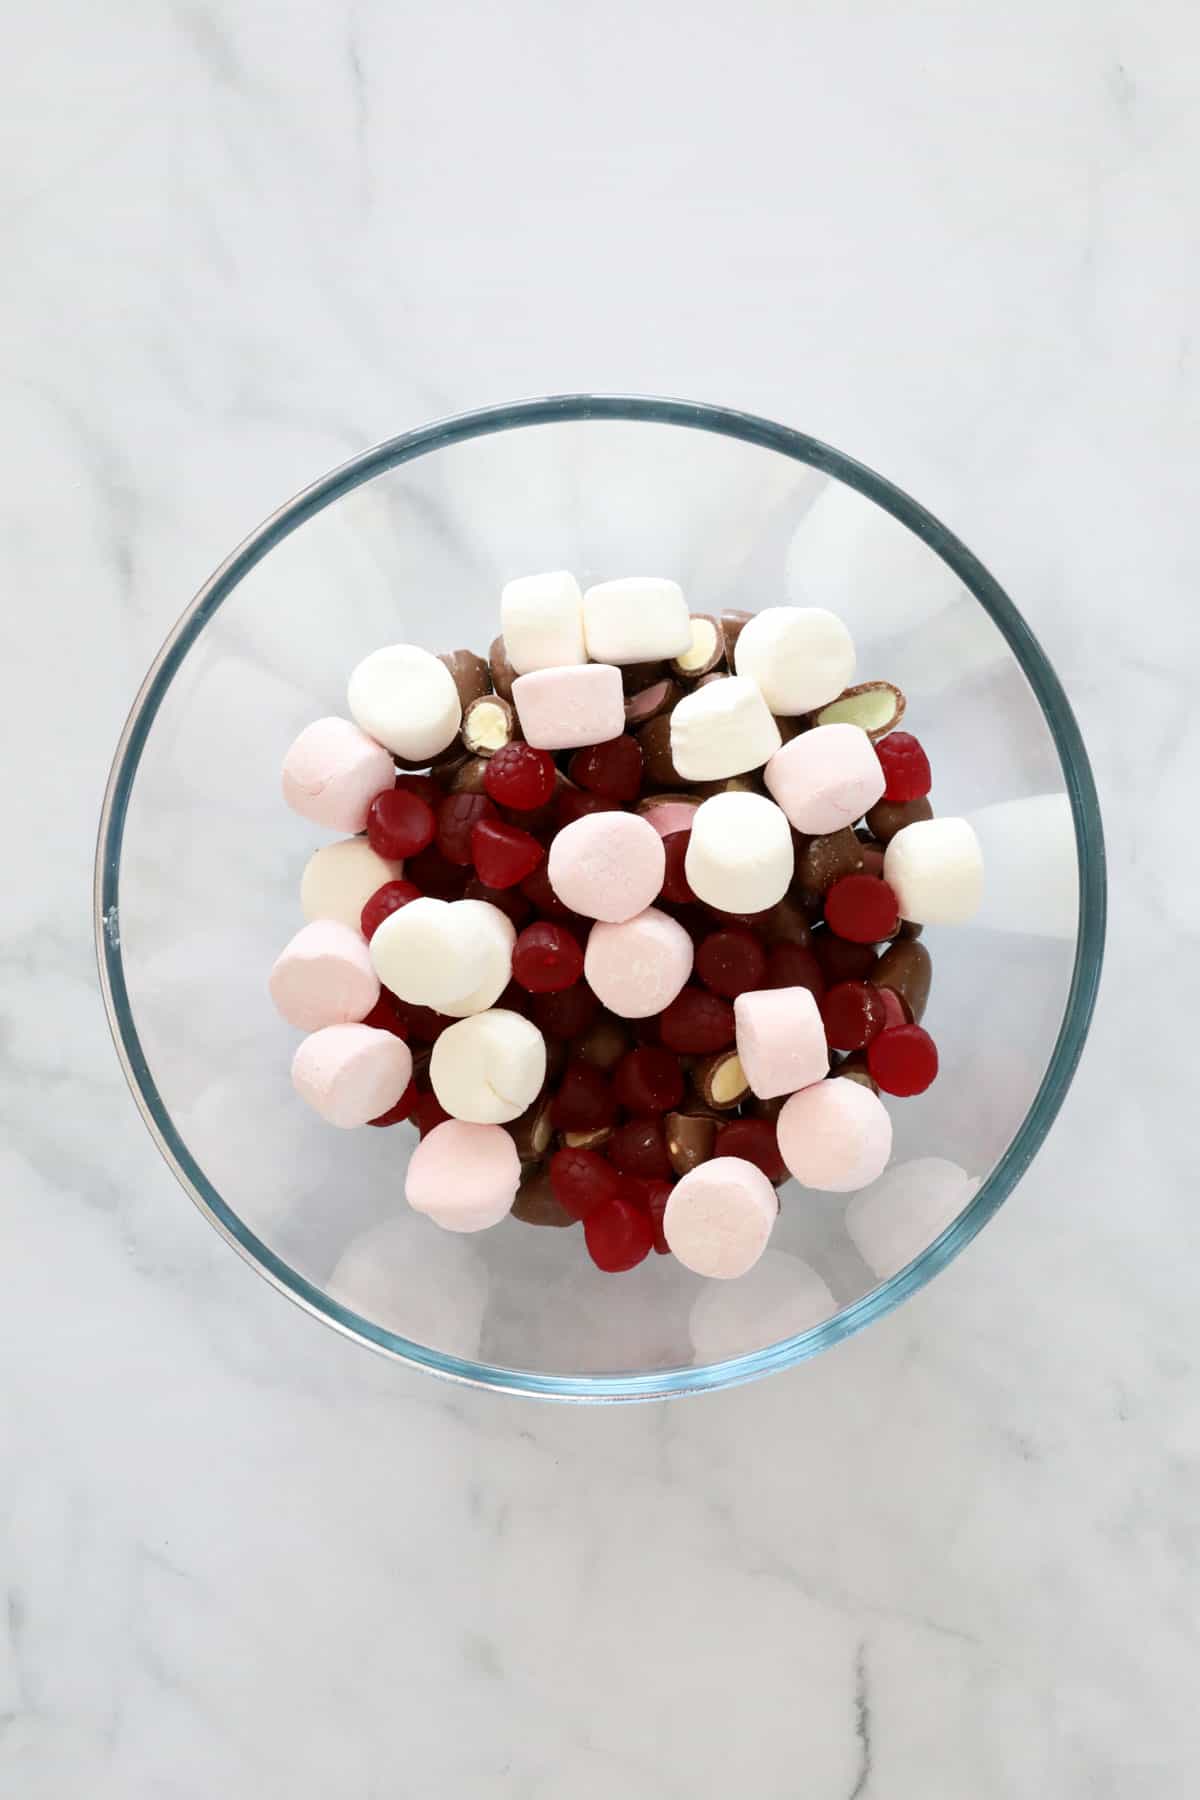 Marshmallows, Clinkers and raspberry lollies in a bowl.